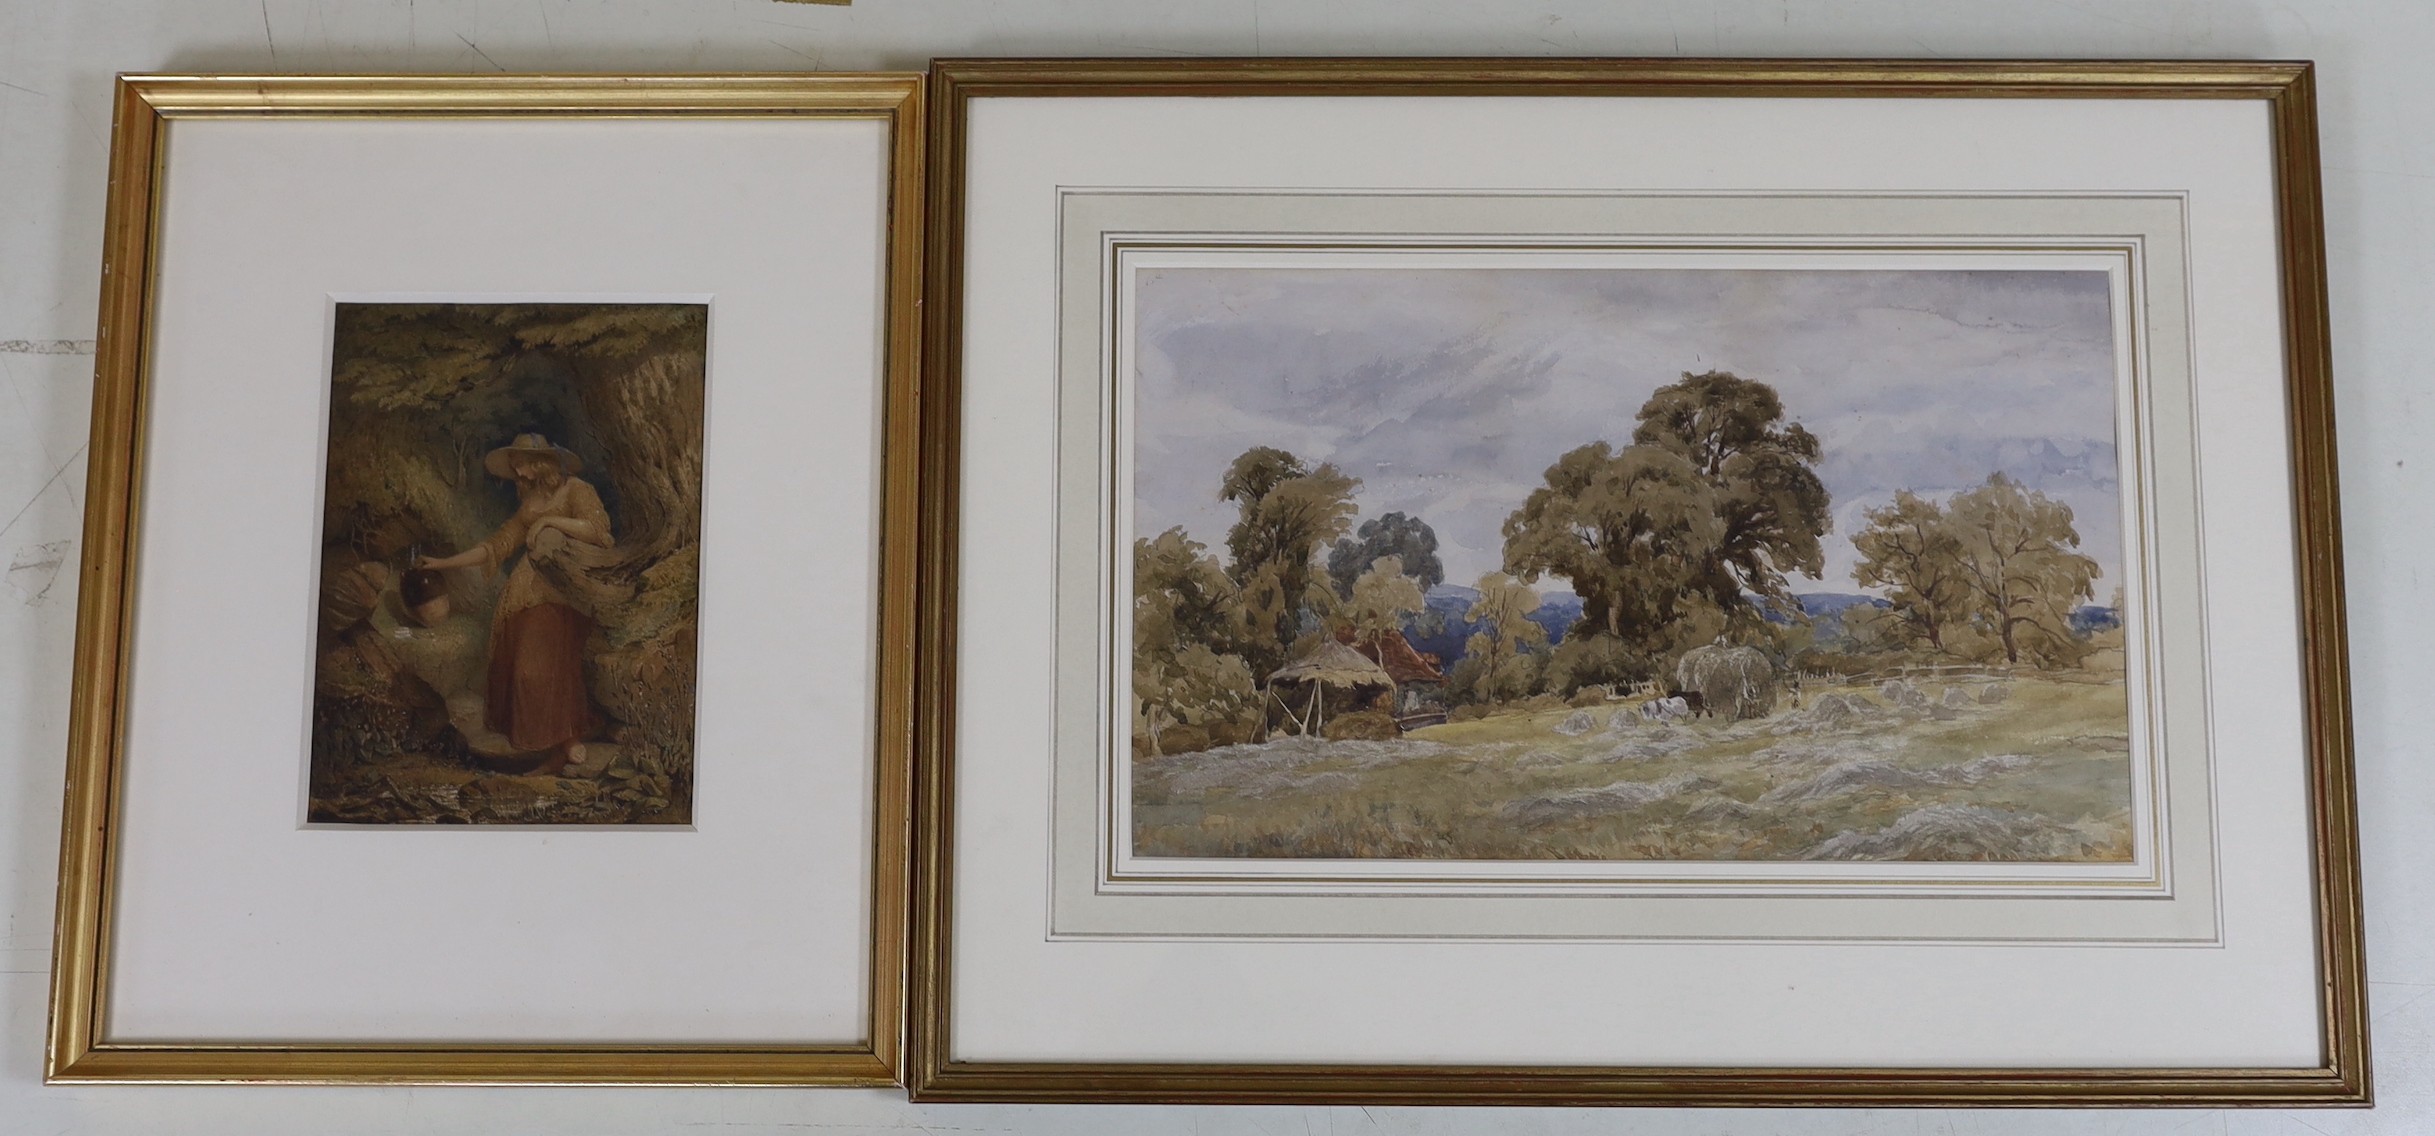 19th century English School, watercolour, Woman collecting water from a spring, 22 x 16cm and John Linnell (1792-1882), watercolour, Harvest scene, 25 x 41cm